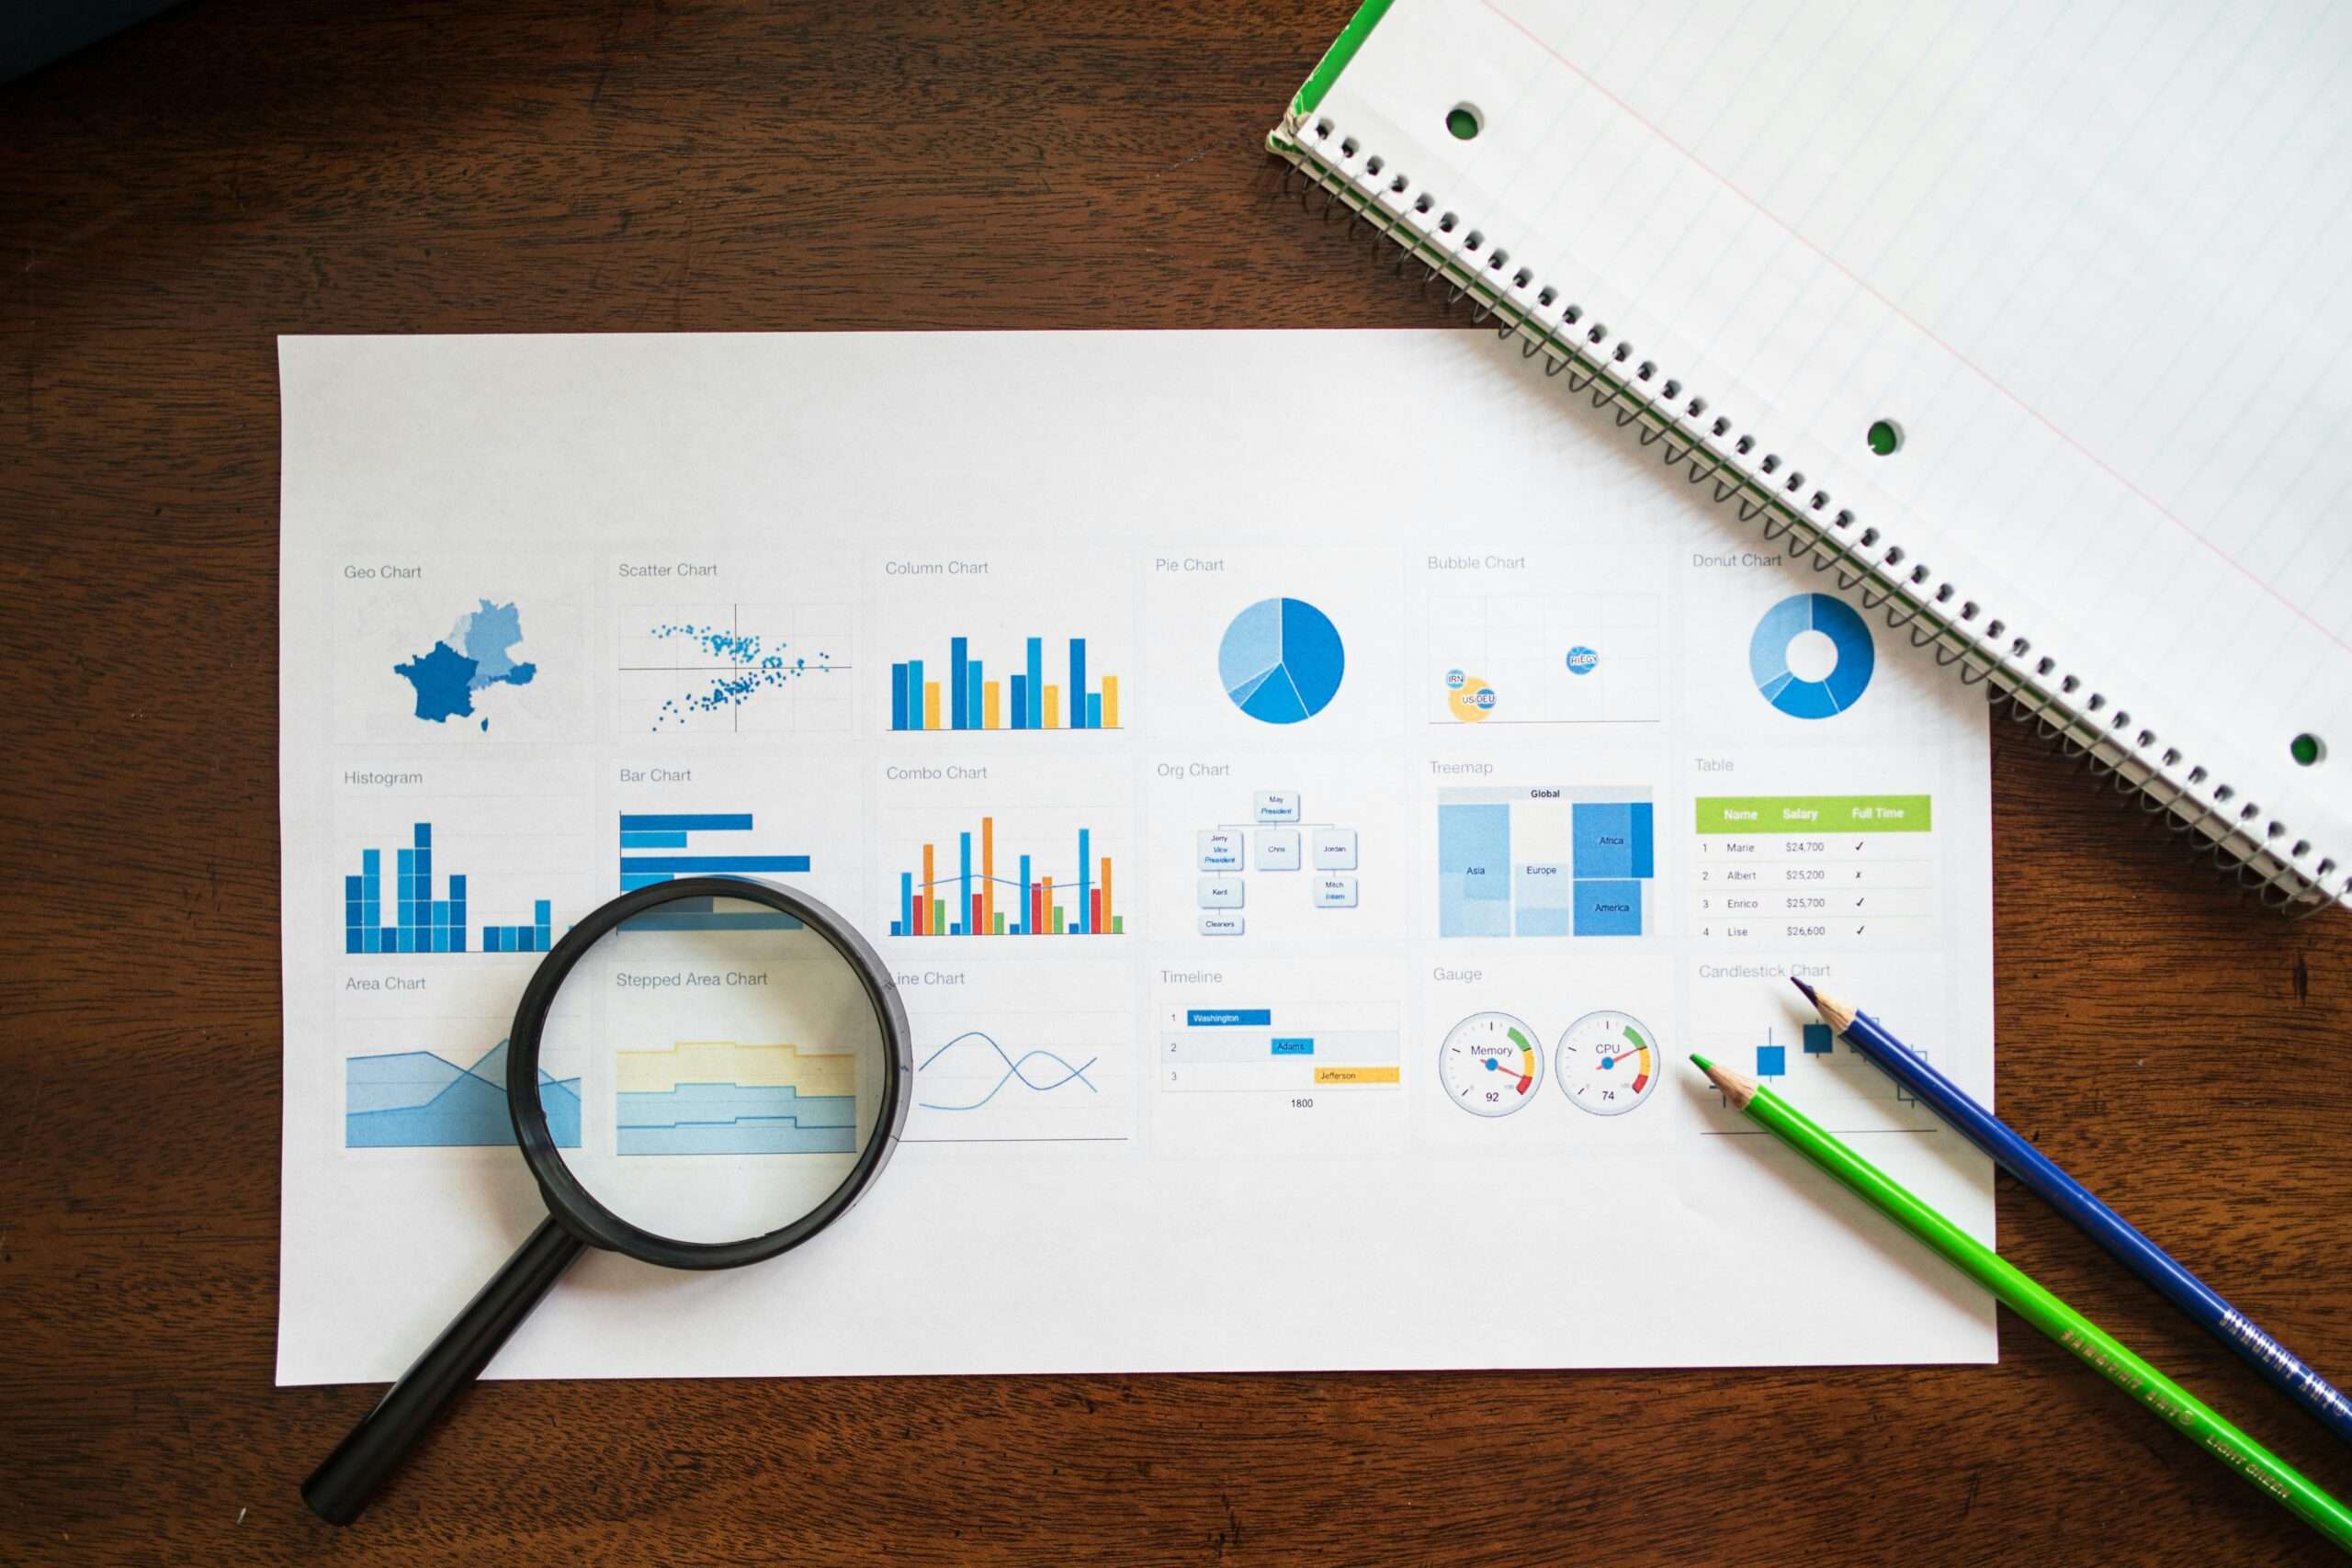 A/B Testing Analysis: Various charts and data analysis tools on a desk, showcasing methods for measuring marketing campaign effectiveness.